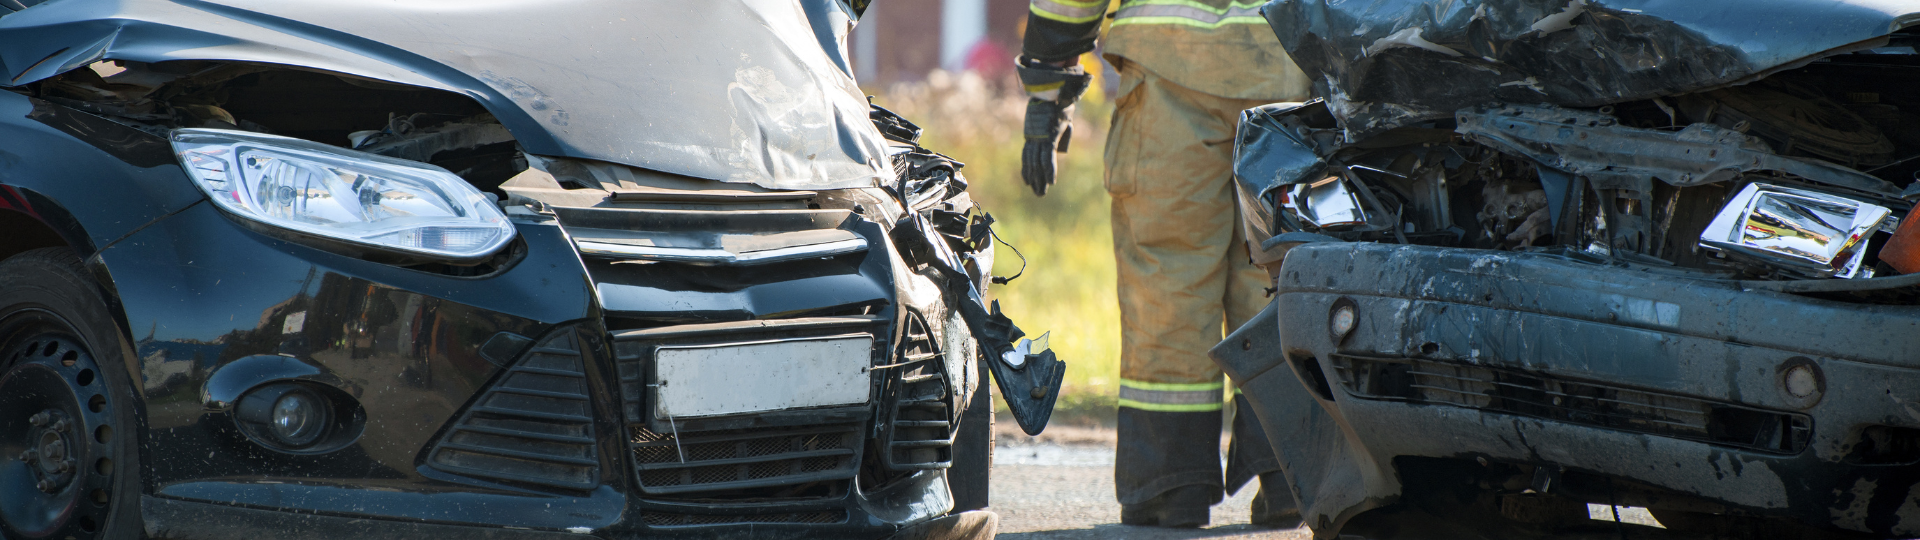 Motor Accident Insurance Commission Quarterly Report (Jul-Sep 2022) Findings. How will this affect CTP insurance claims?